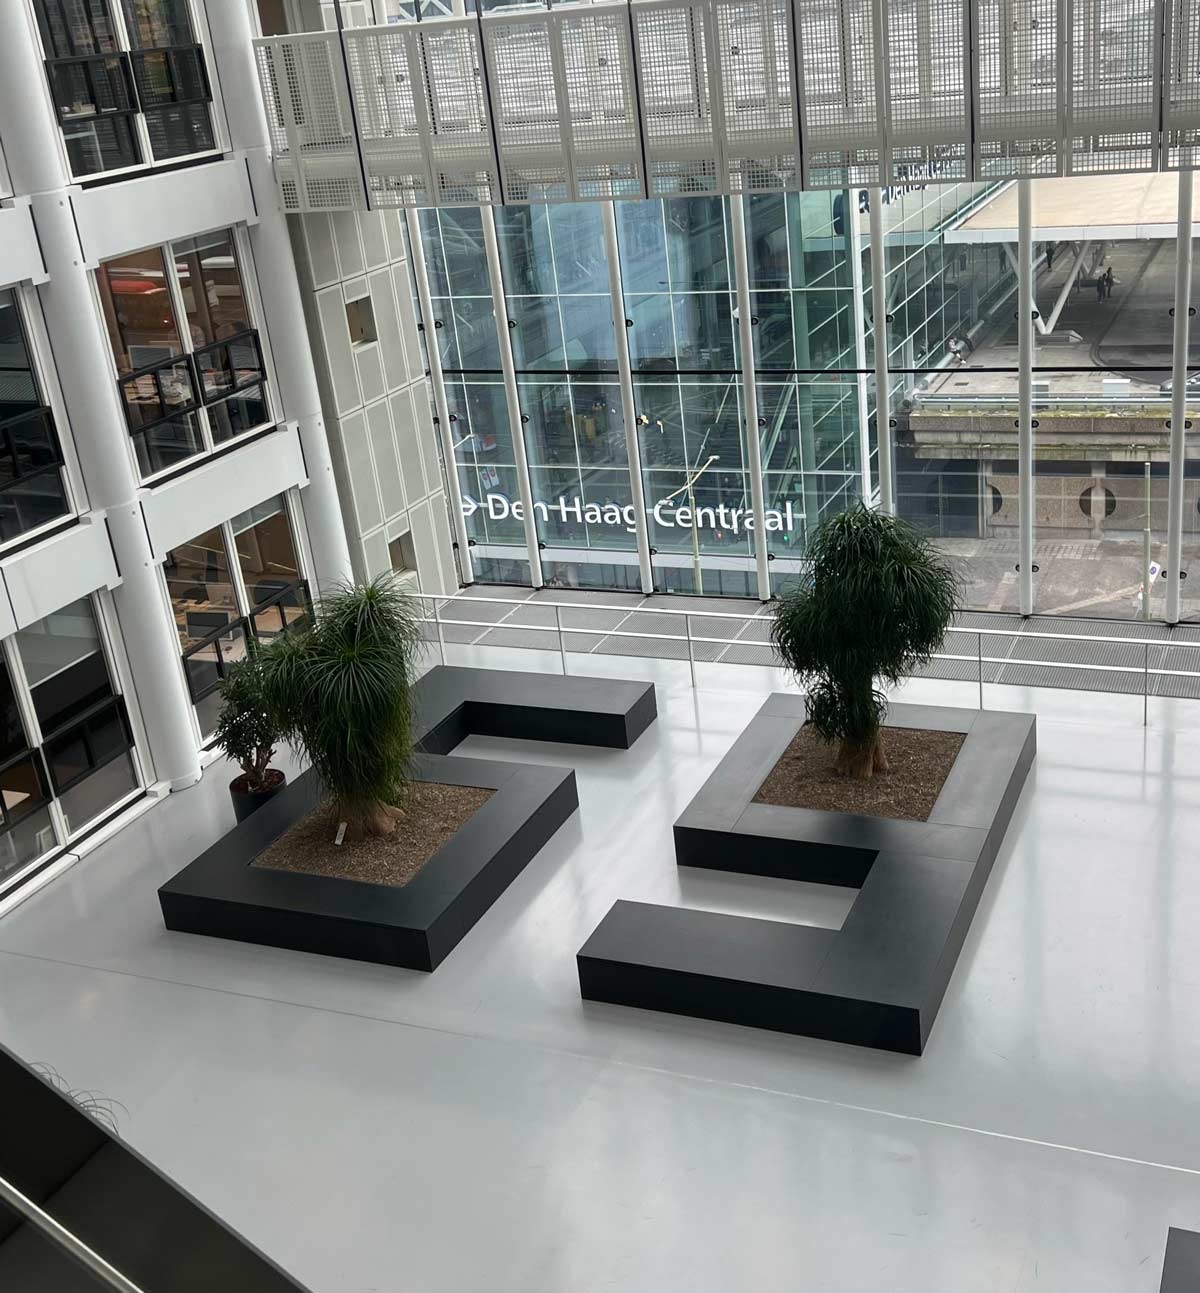 Planters in the Dutch ministry of foreign affairs